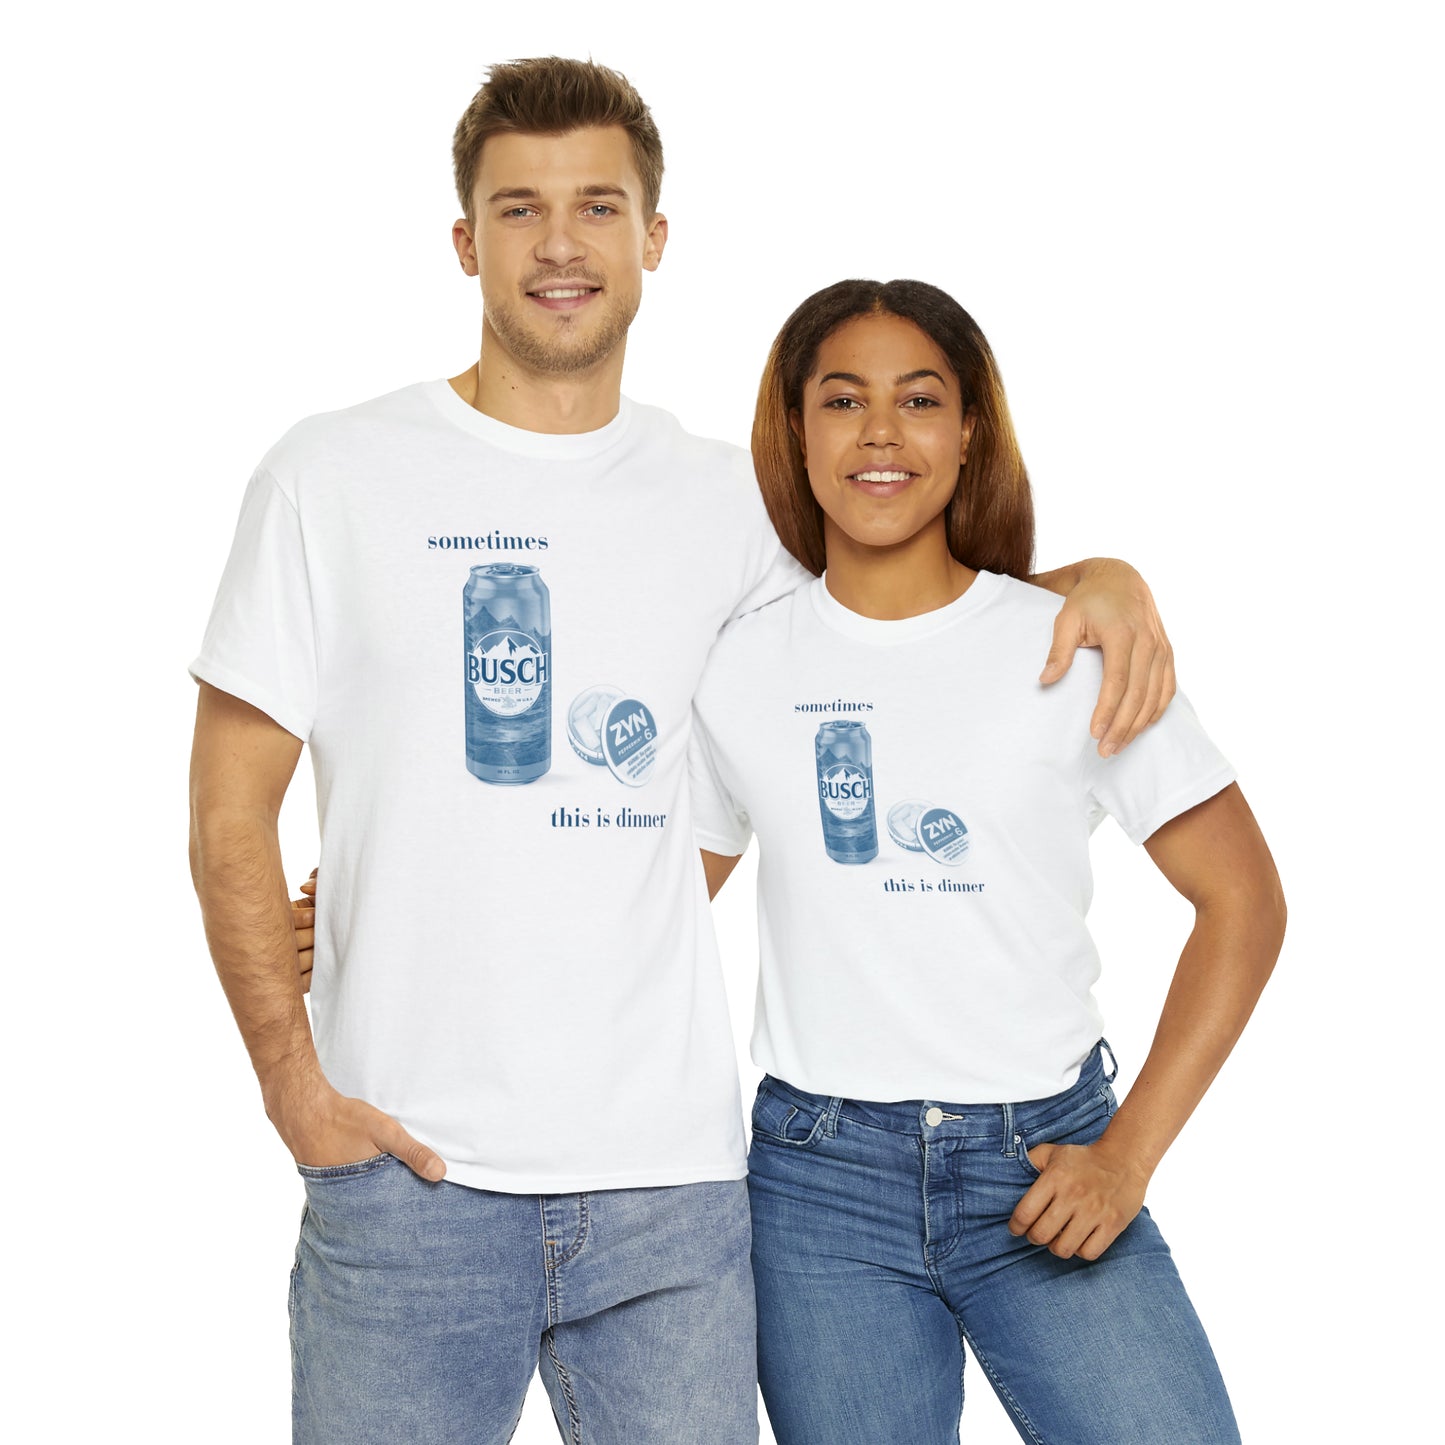 Sometimes this is dinner Busch and Zyns 6mg - Unisex Heavy Cotton Tee